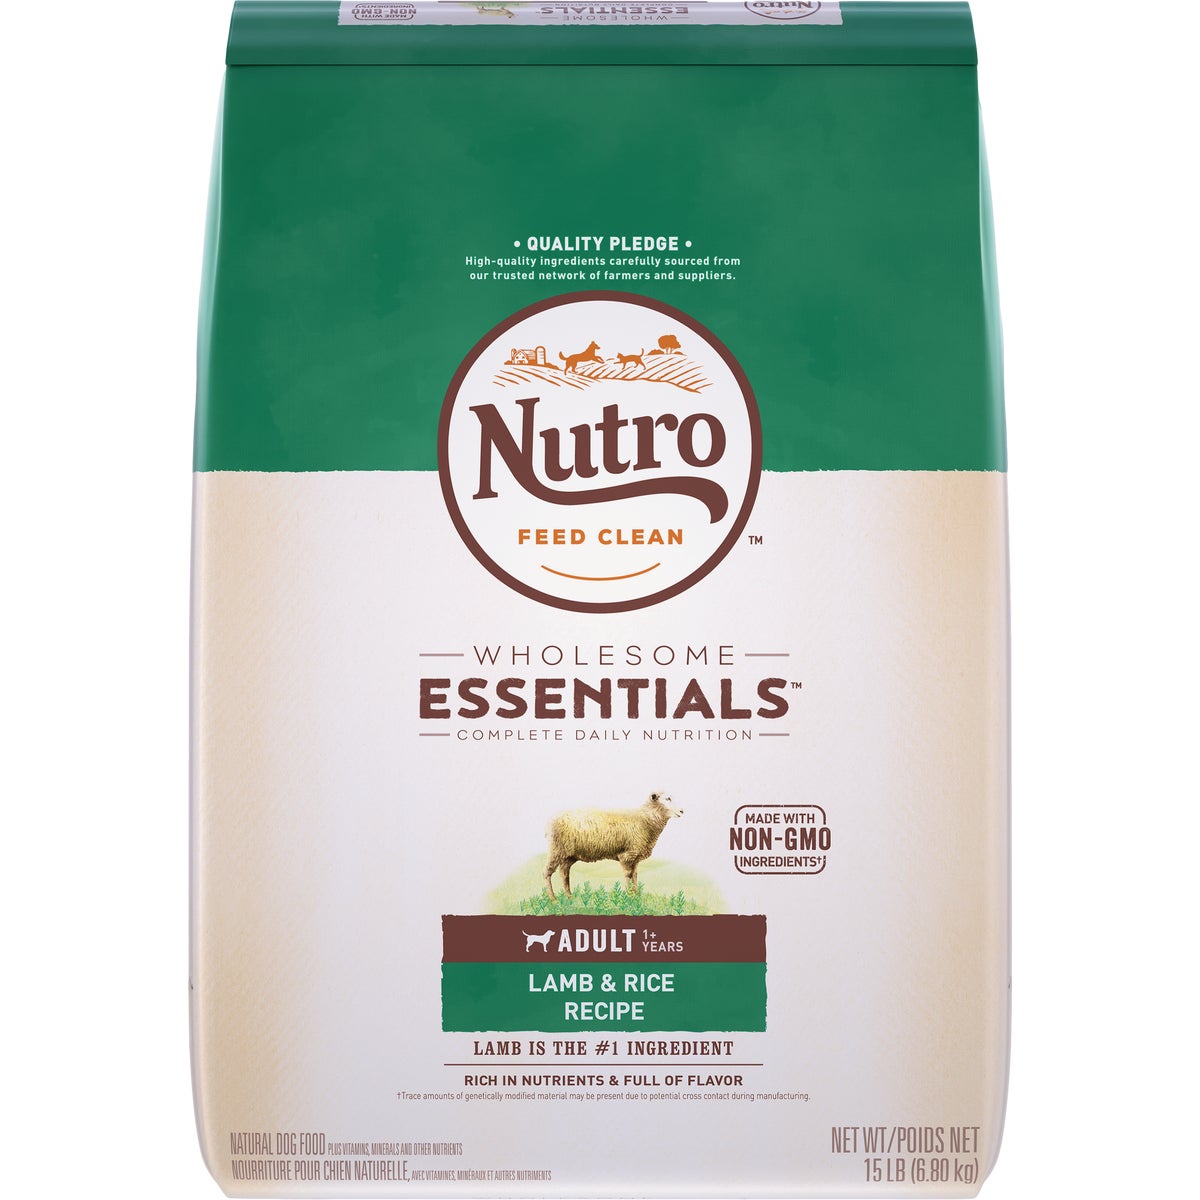 Nutro Wholesome Essentials 12 Lb. Lamb & Rice Adult Dry Dog Food